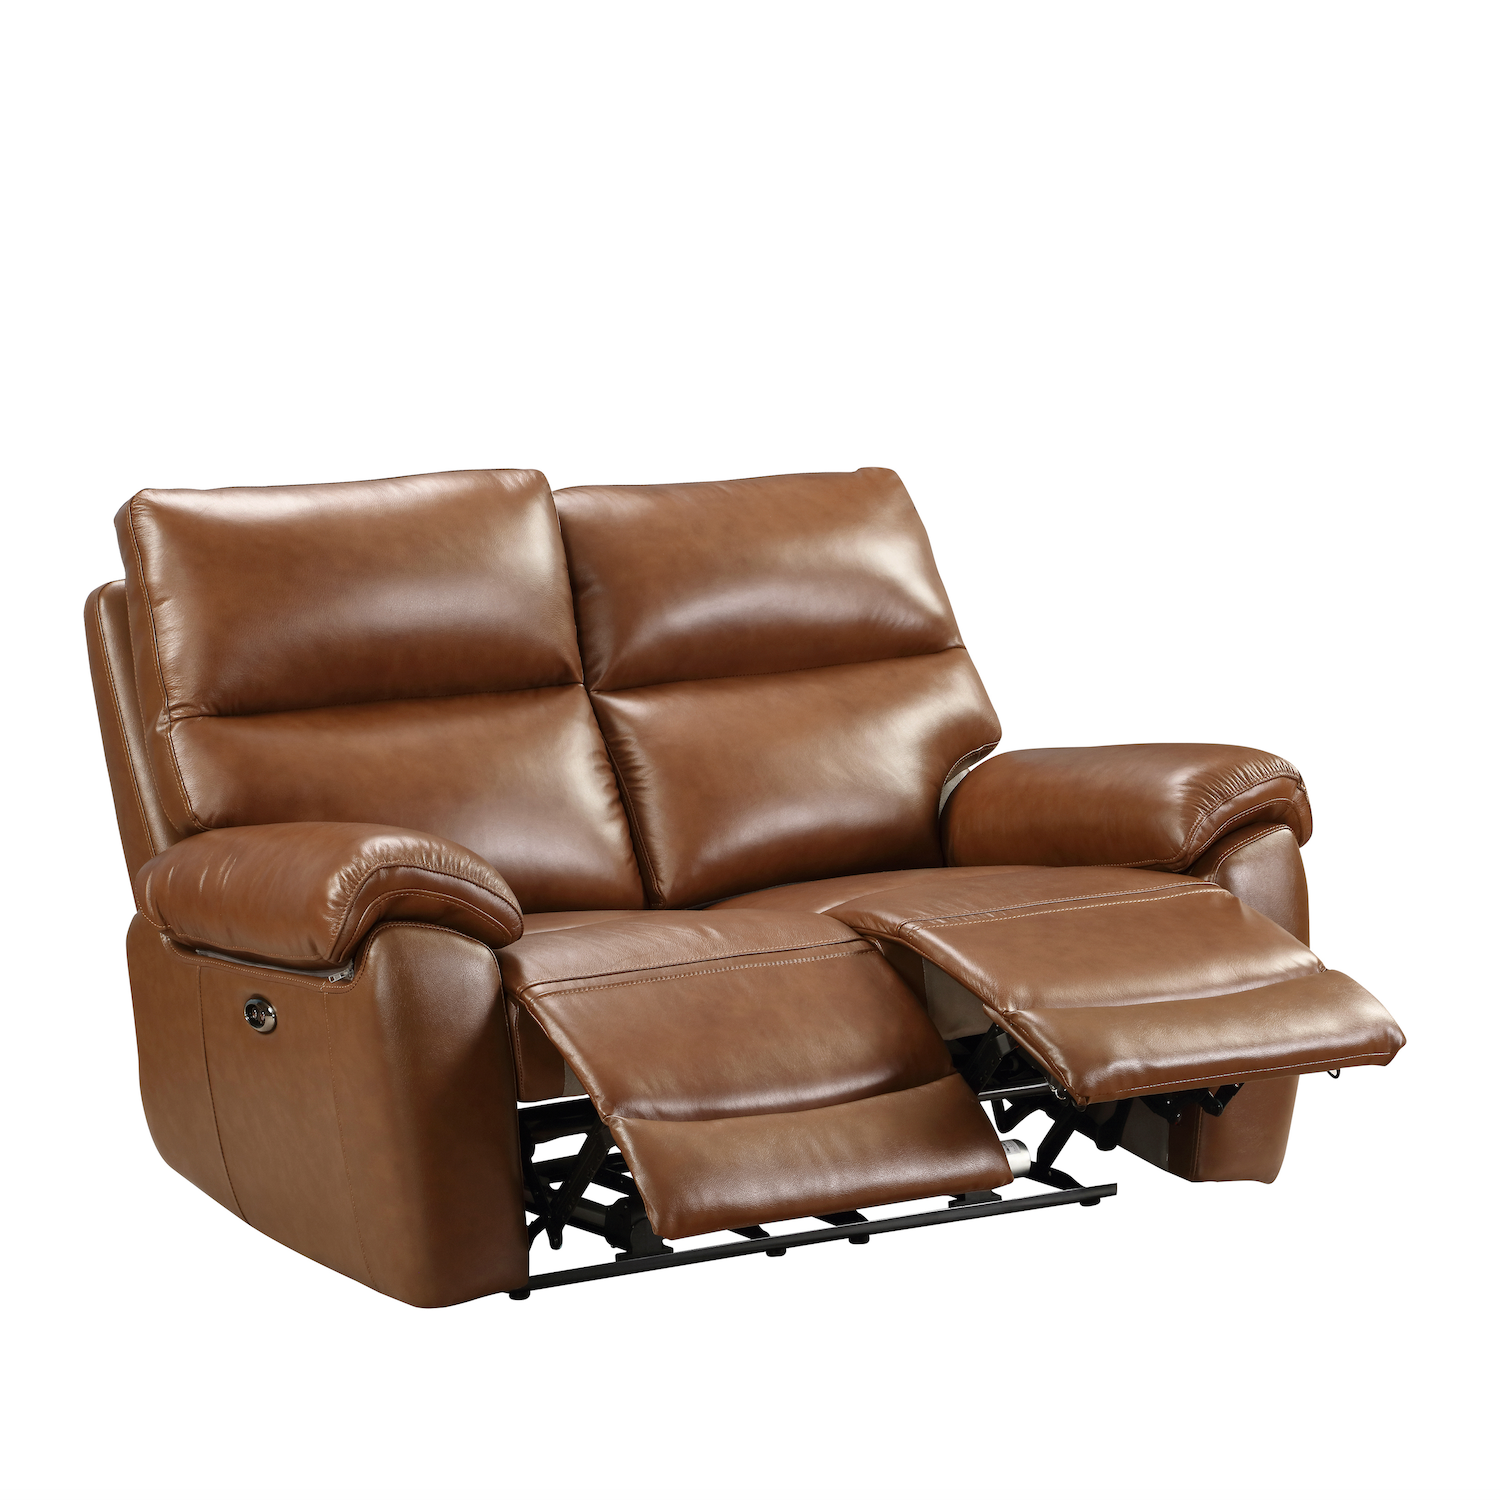 Rocco 2 Seater Power Recliner Sofa Chestnut Leather